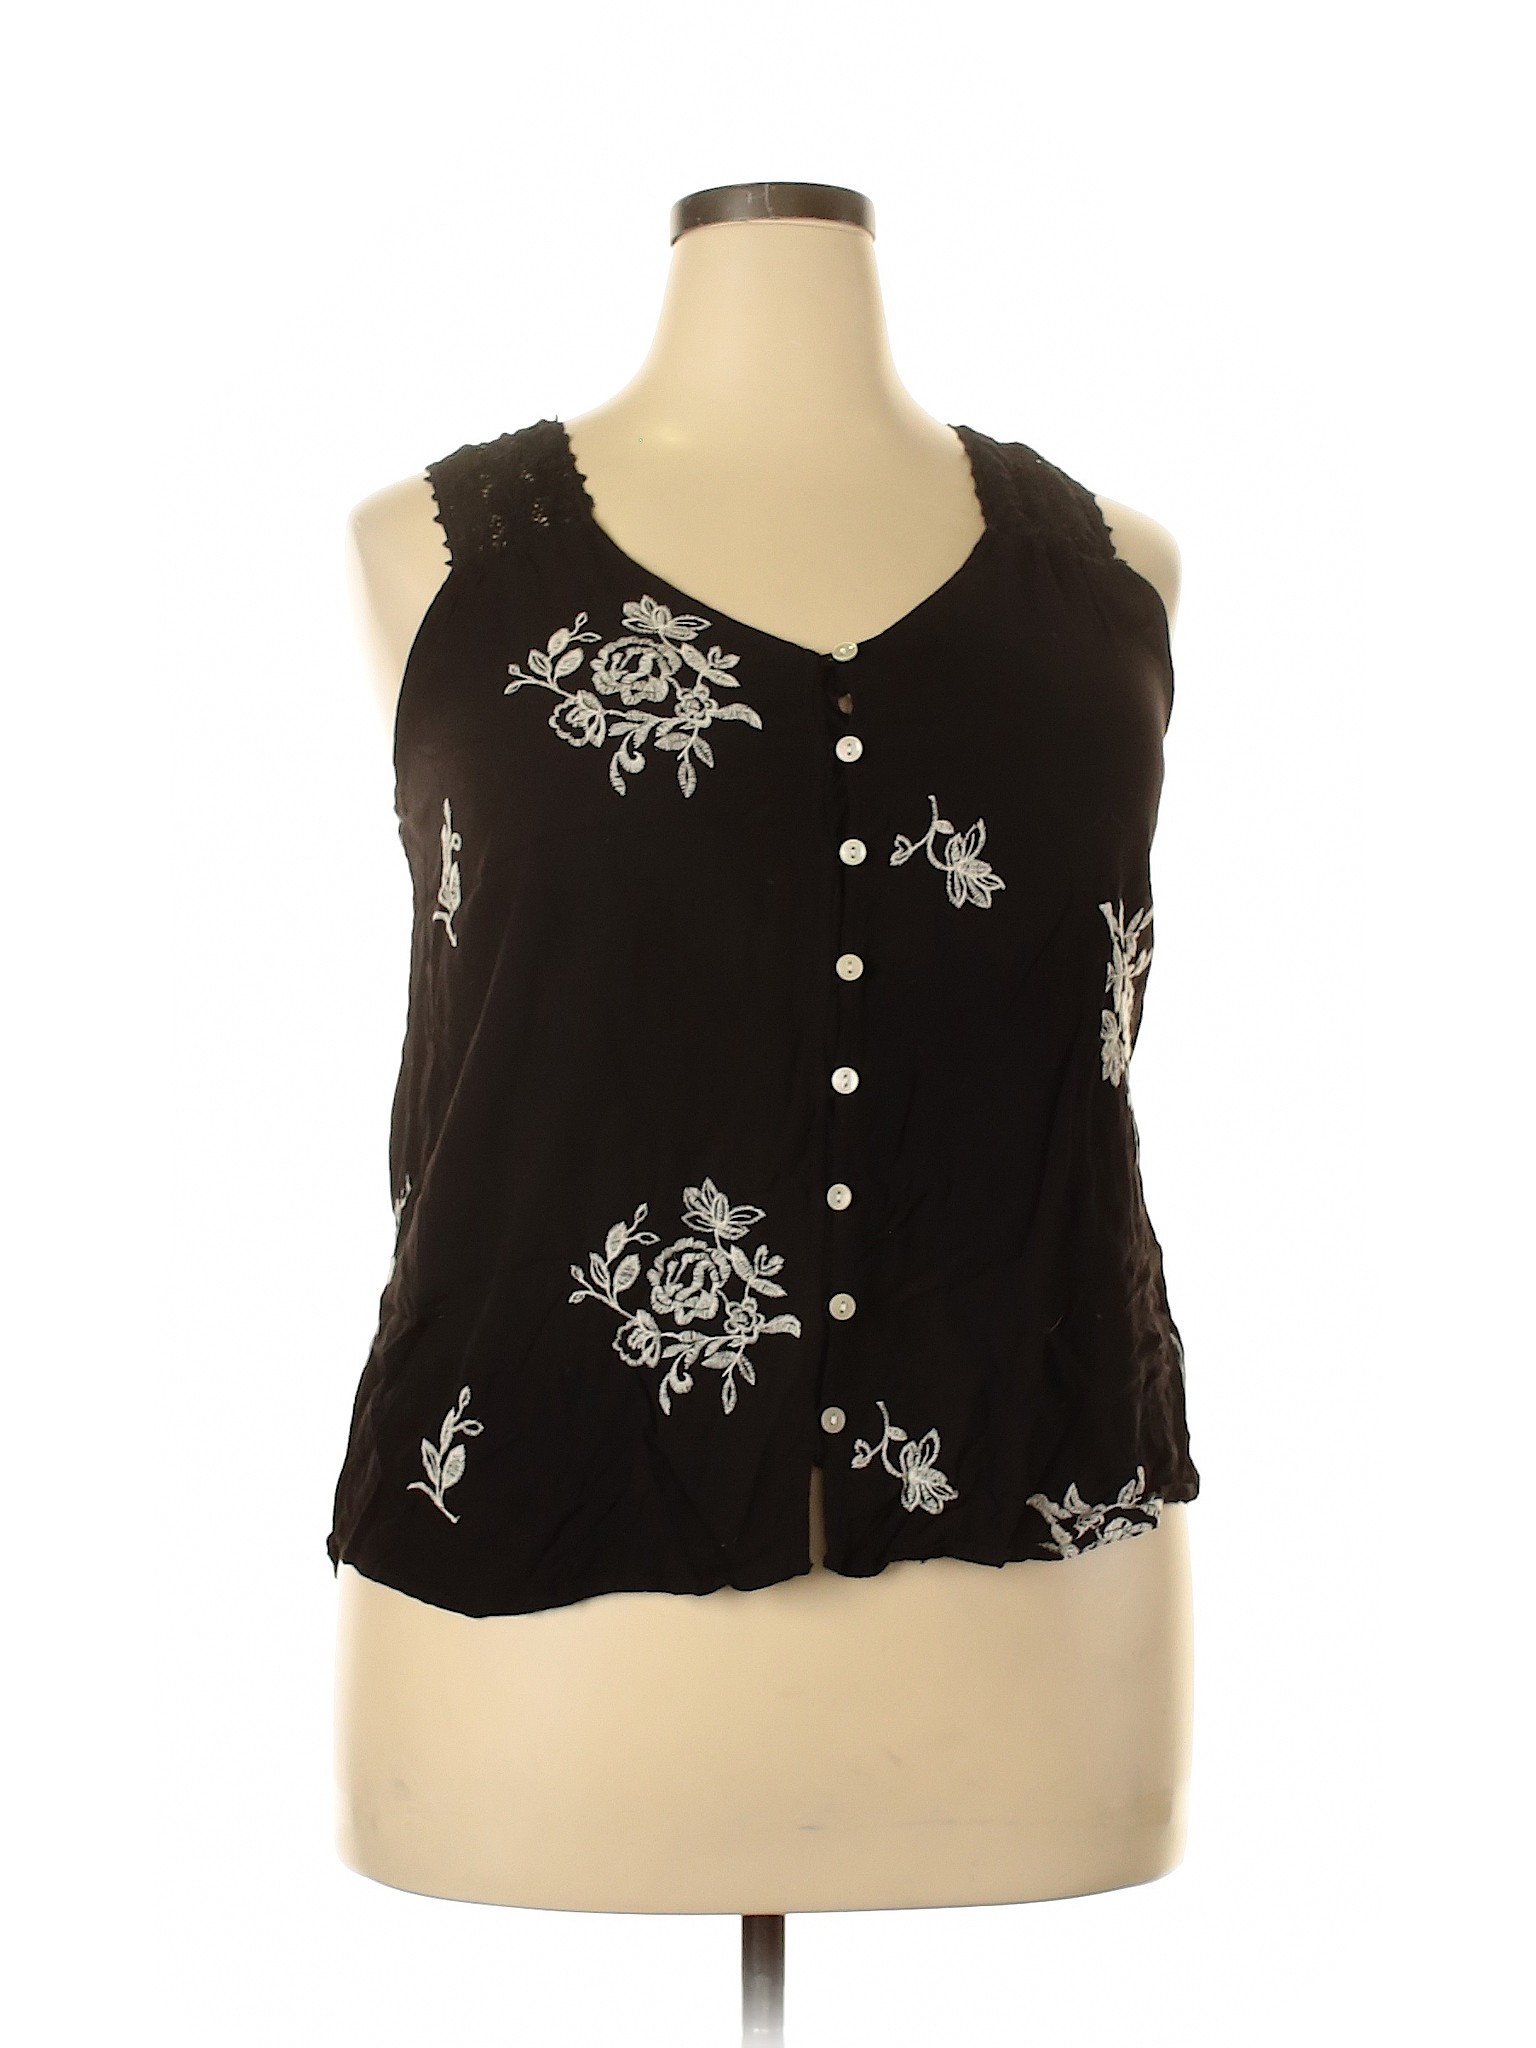 Knox Rose 100% Rayon Solid Black Sleeveless Blouse Size XL - 77% off ...